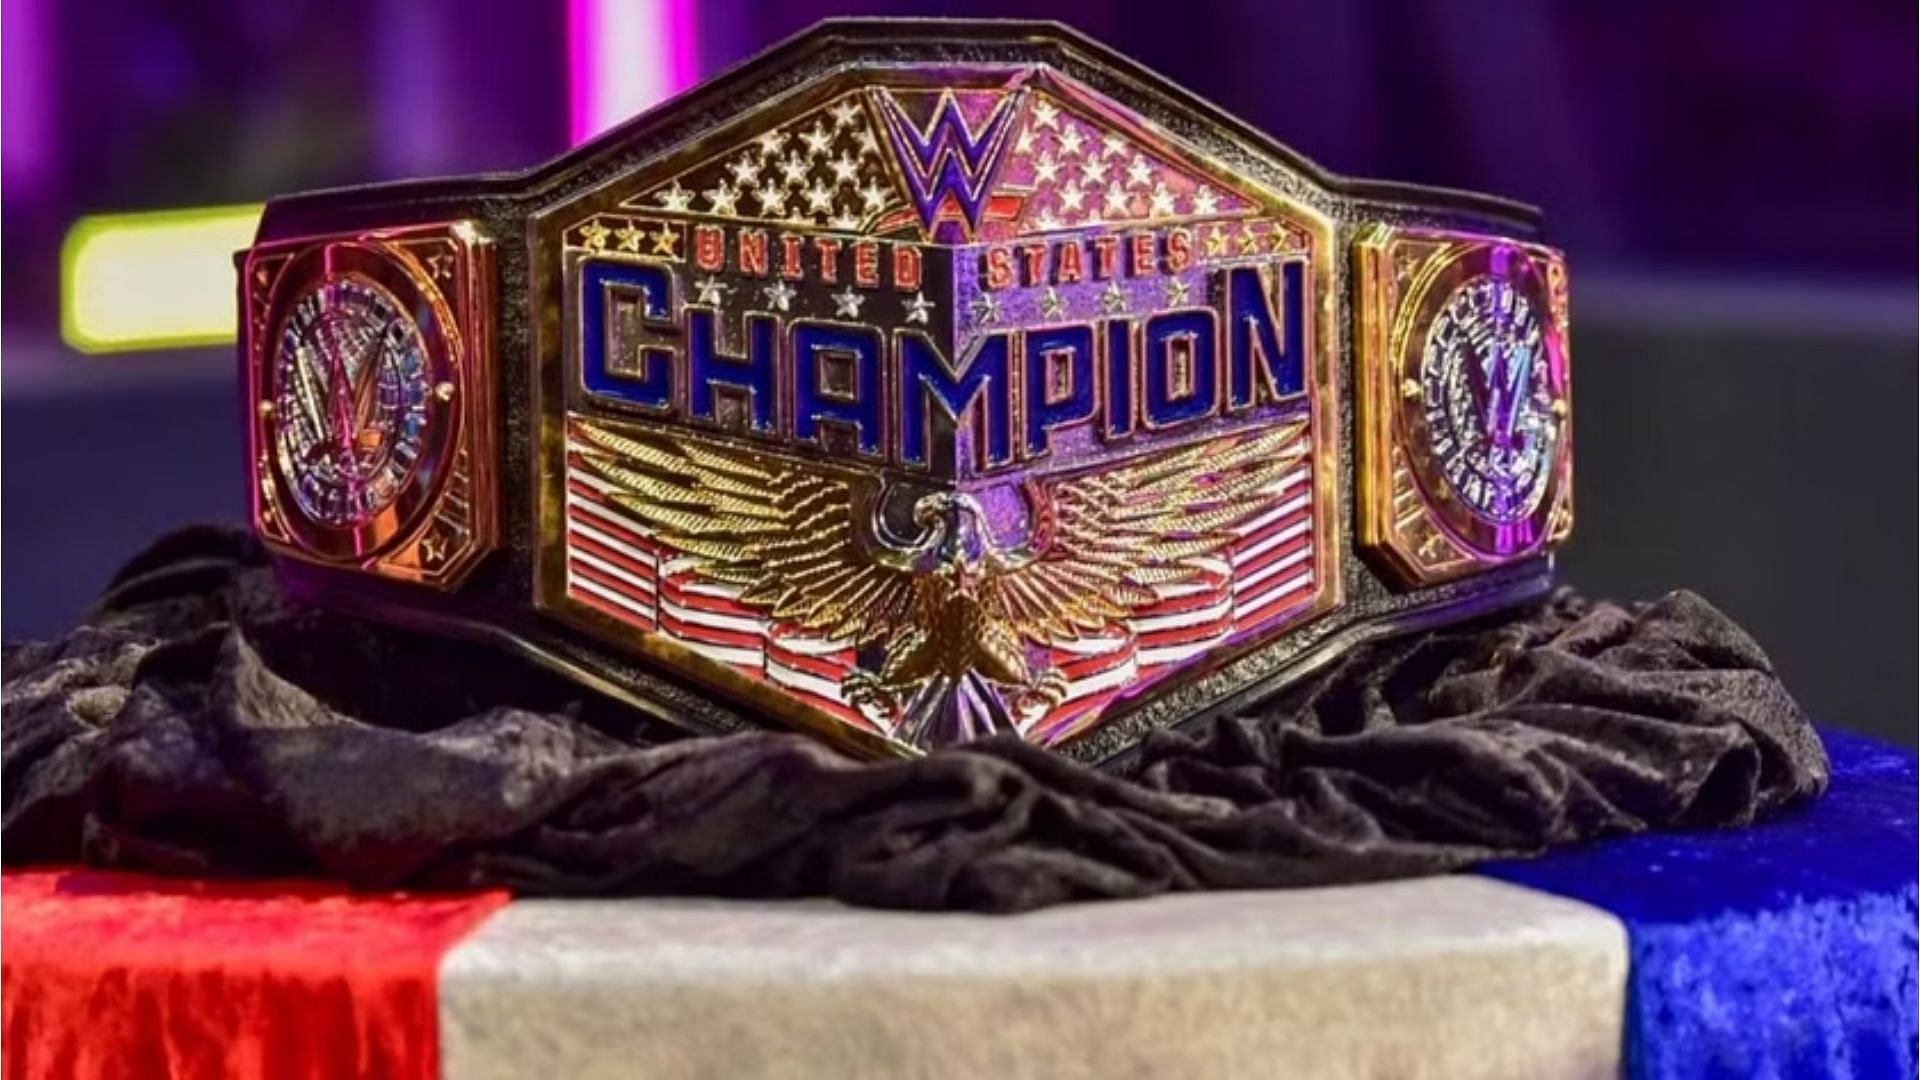 The United States Championship could change hands soon.